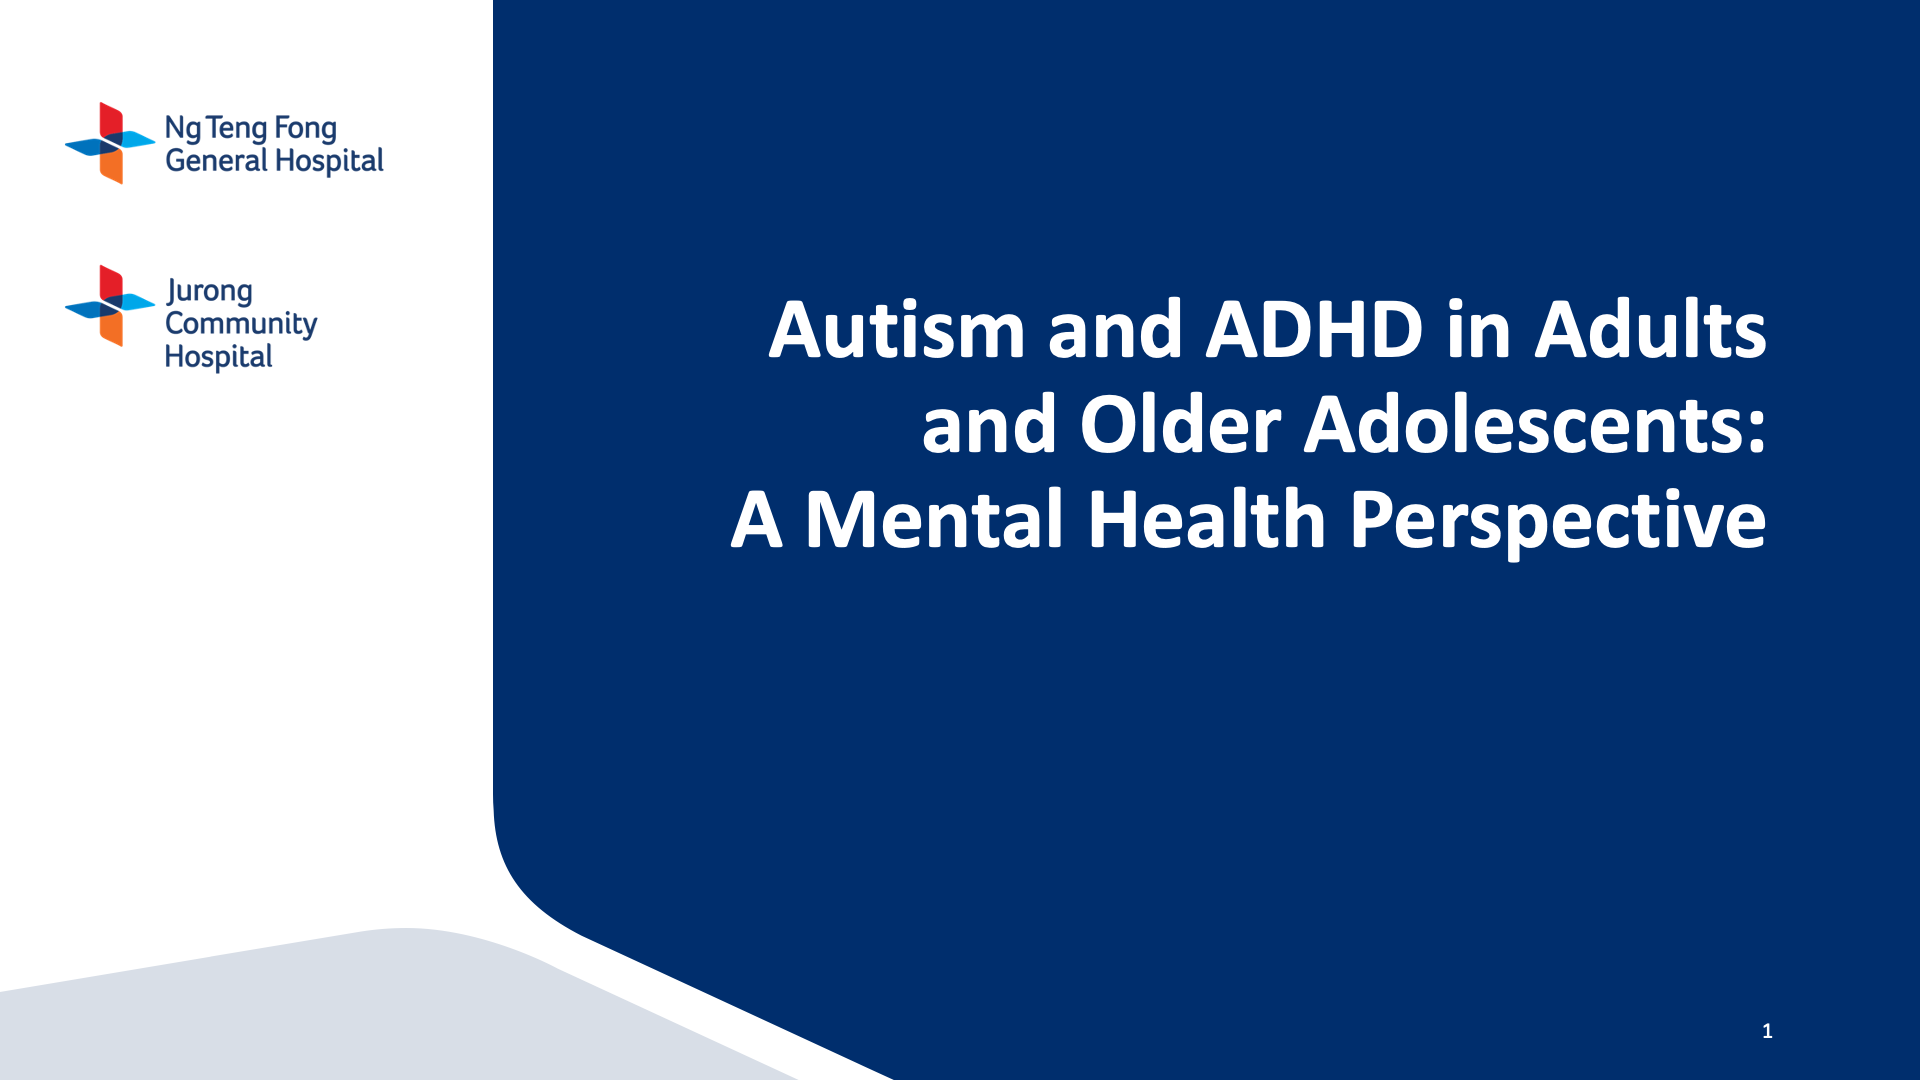 Monthly Caregiver Talk - Autism and ADHD in Adults and Older Adolescents: A Mental Health Perspective